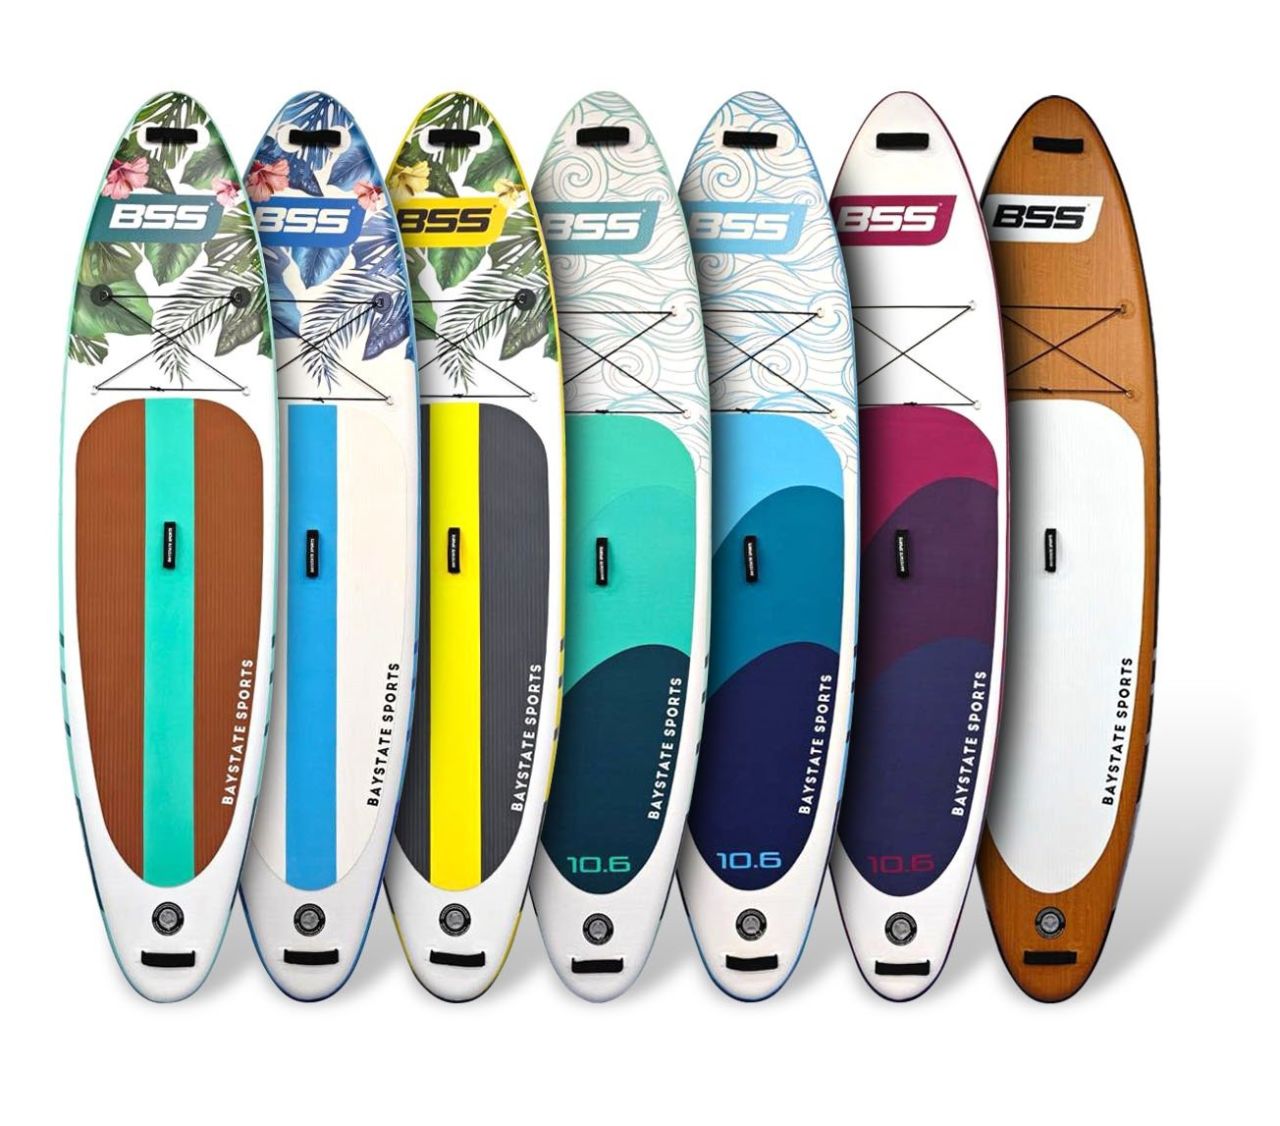 SUP - 7 New BSS Inflatable Paddle Board Models 